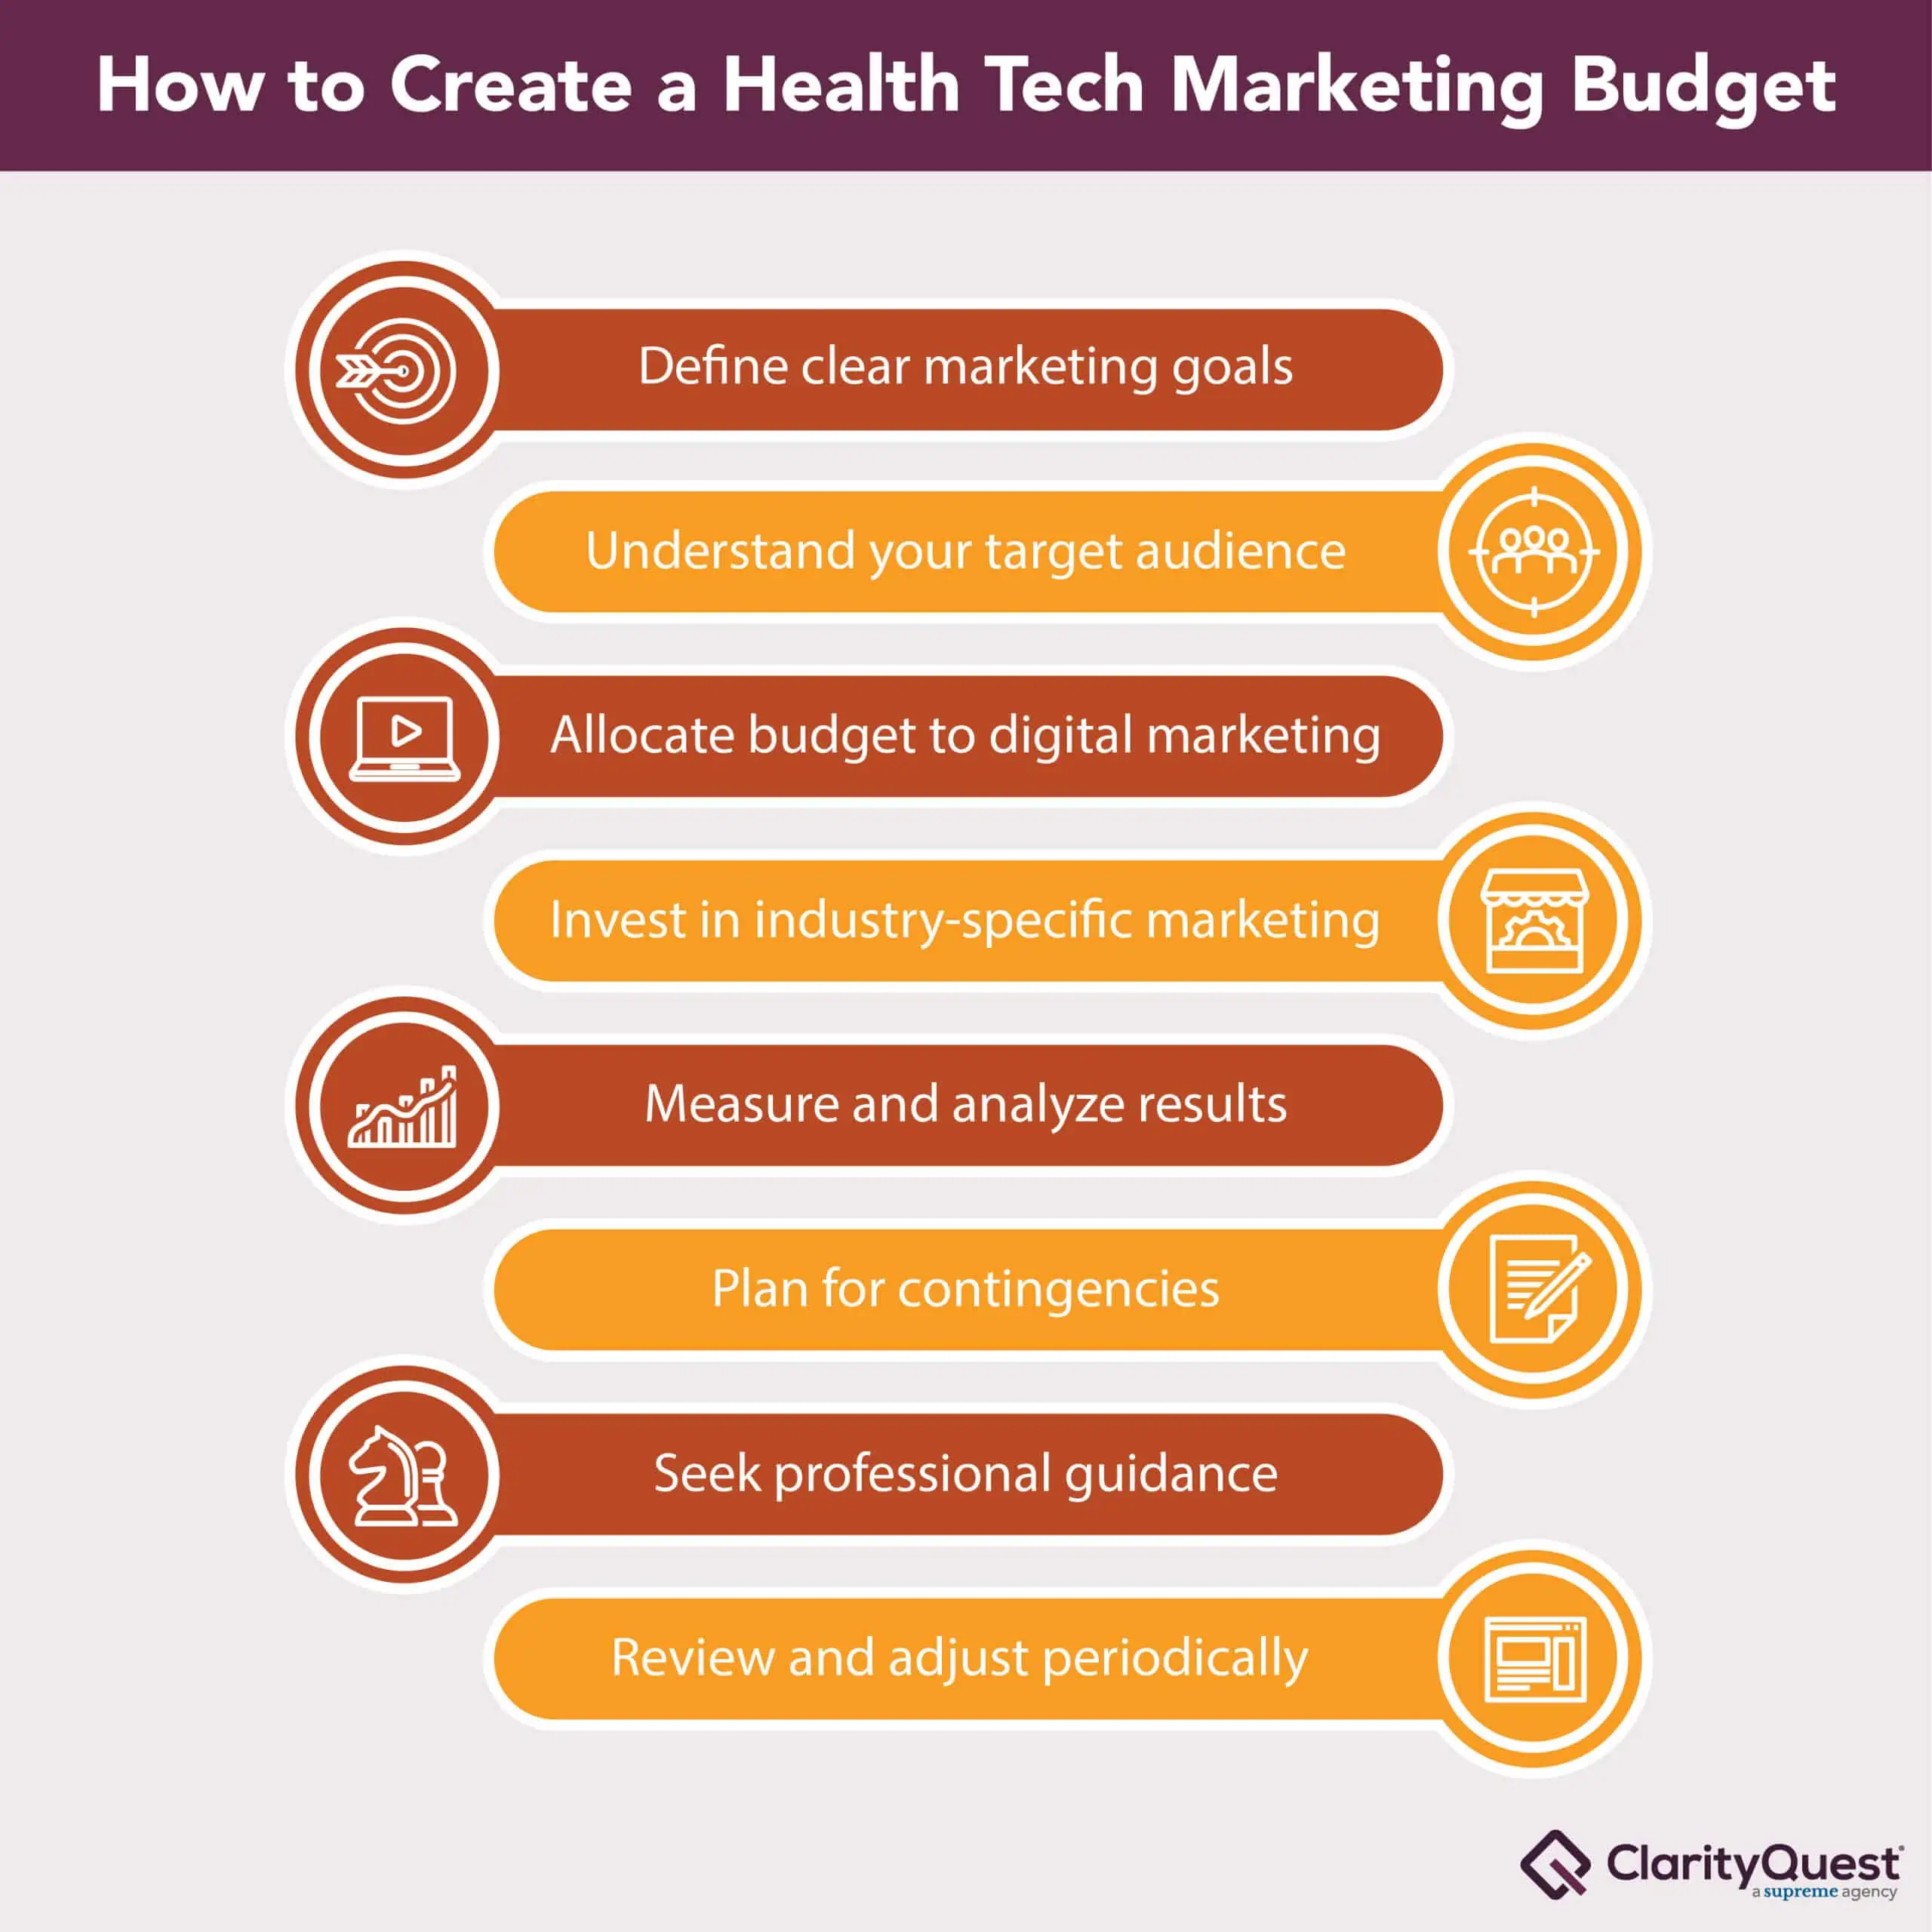 marketing budget allocation best practices infographic